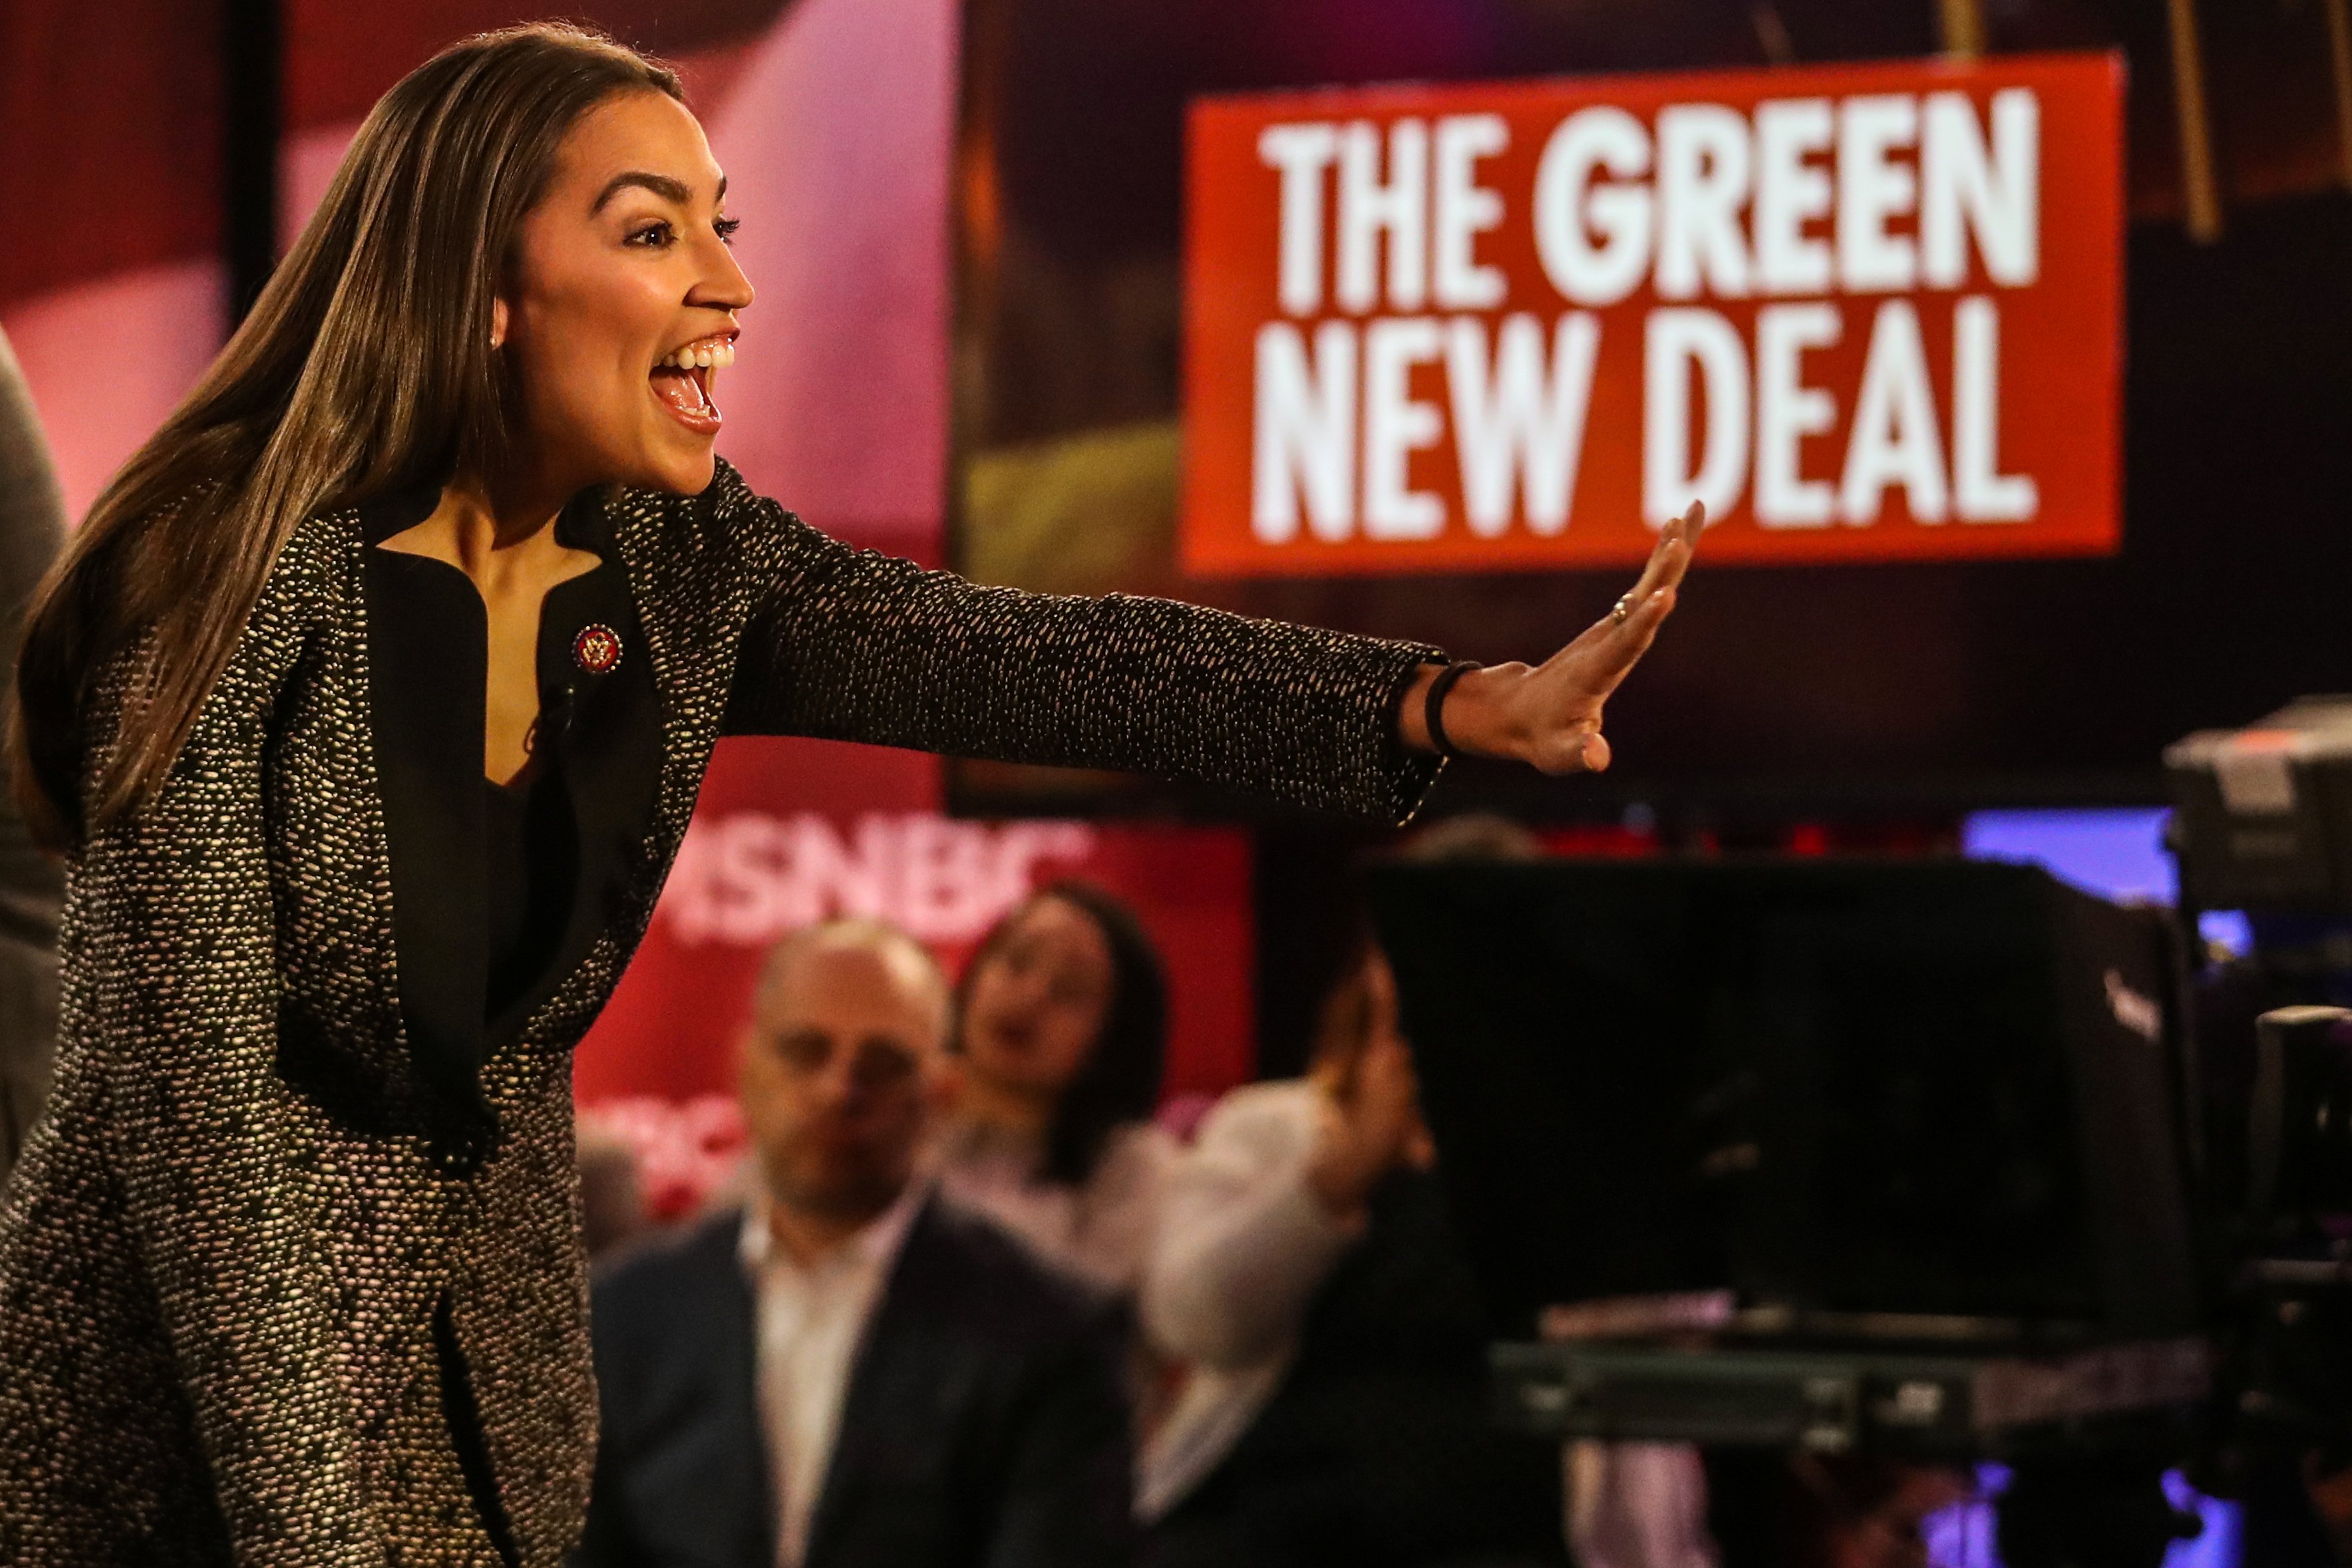 U.S. Representative Alexandria Ocasio-Cortez (D-NY) greets audiences following a televised town hall event in New York